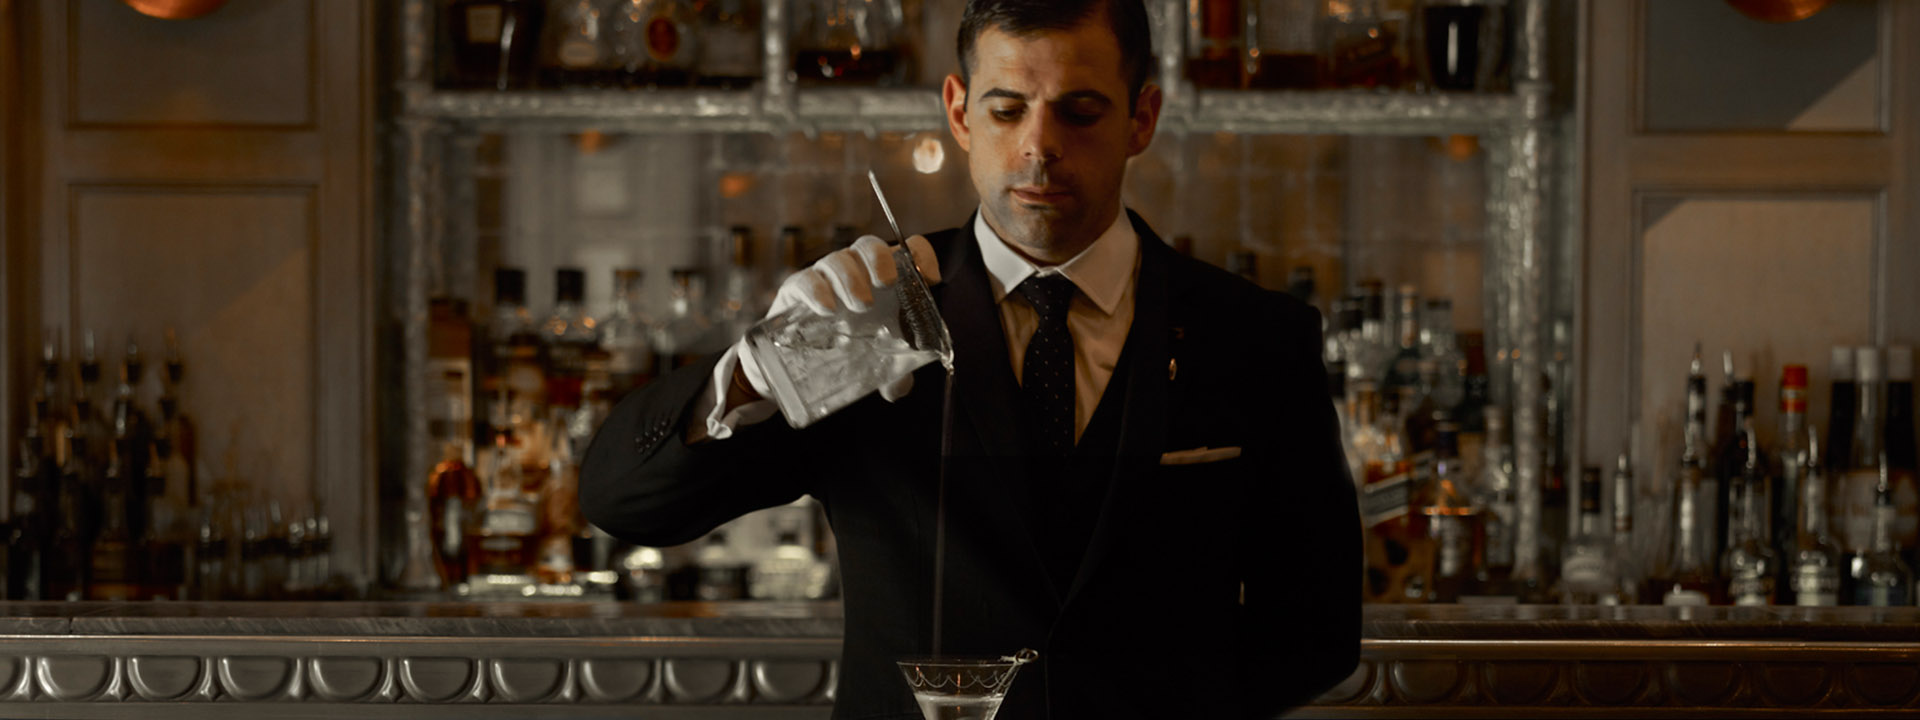 A bartender dressed in a suit, pouring drink from a vessle to a glass with a dim light.